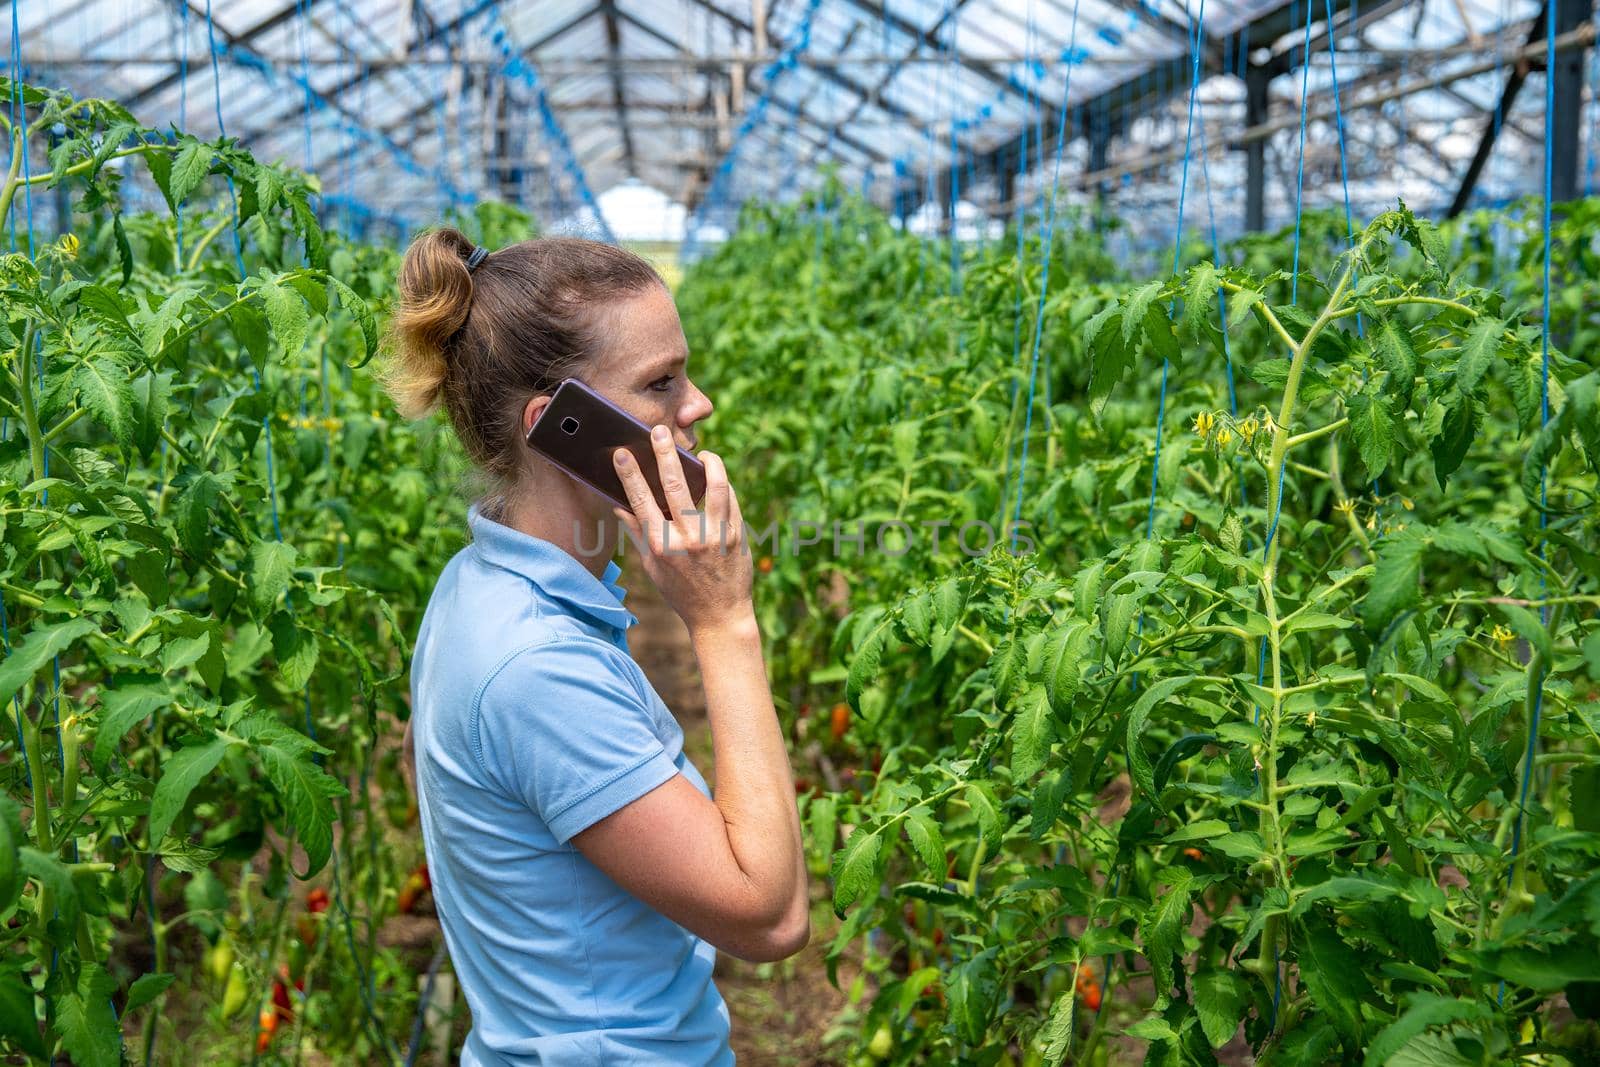 farmer phoning in a greenhouse on an organic farm growing tomatoes.